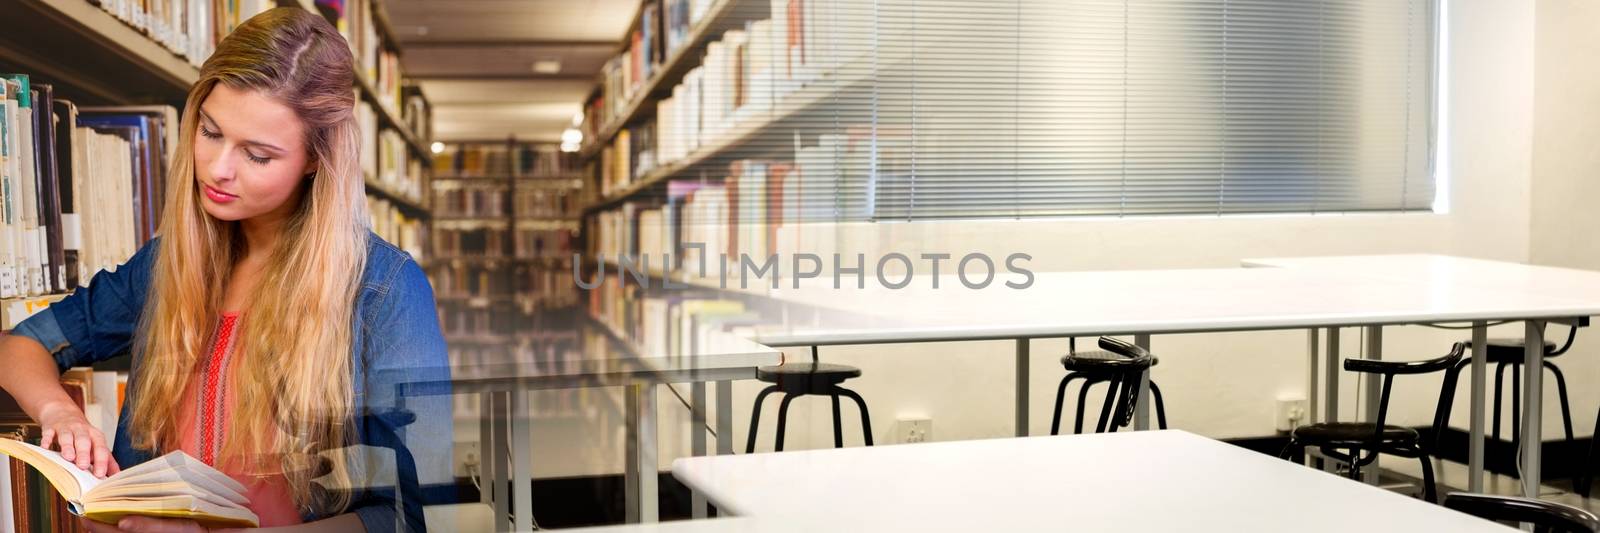 Student woman in education library with transition by Wavebreakmedia